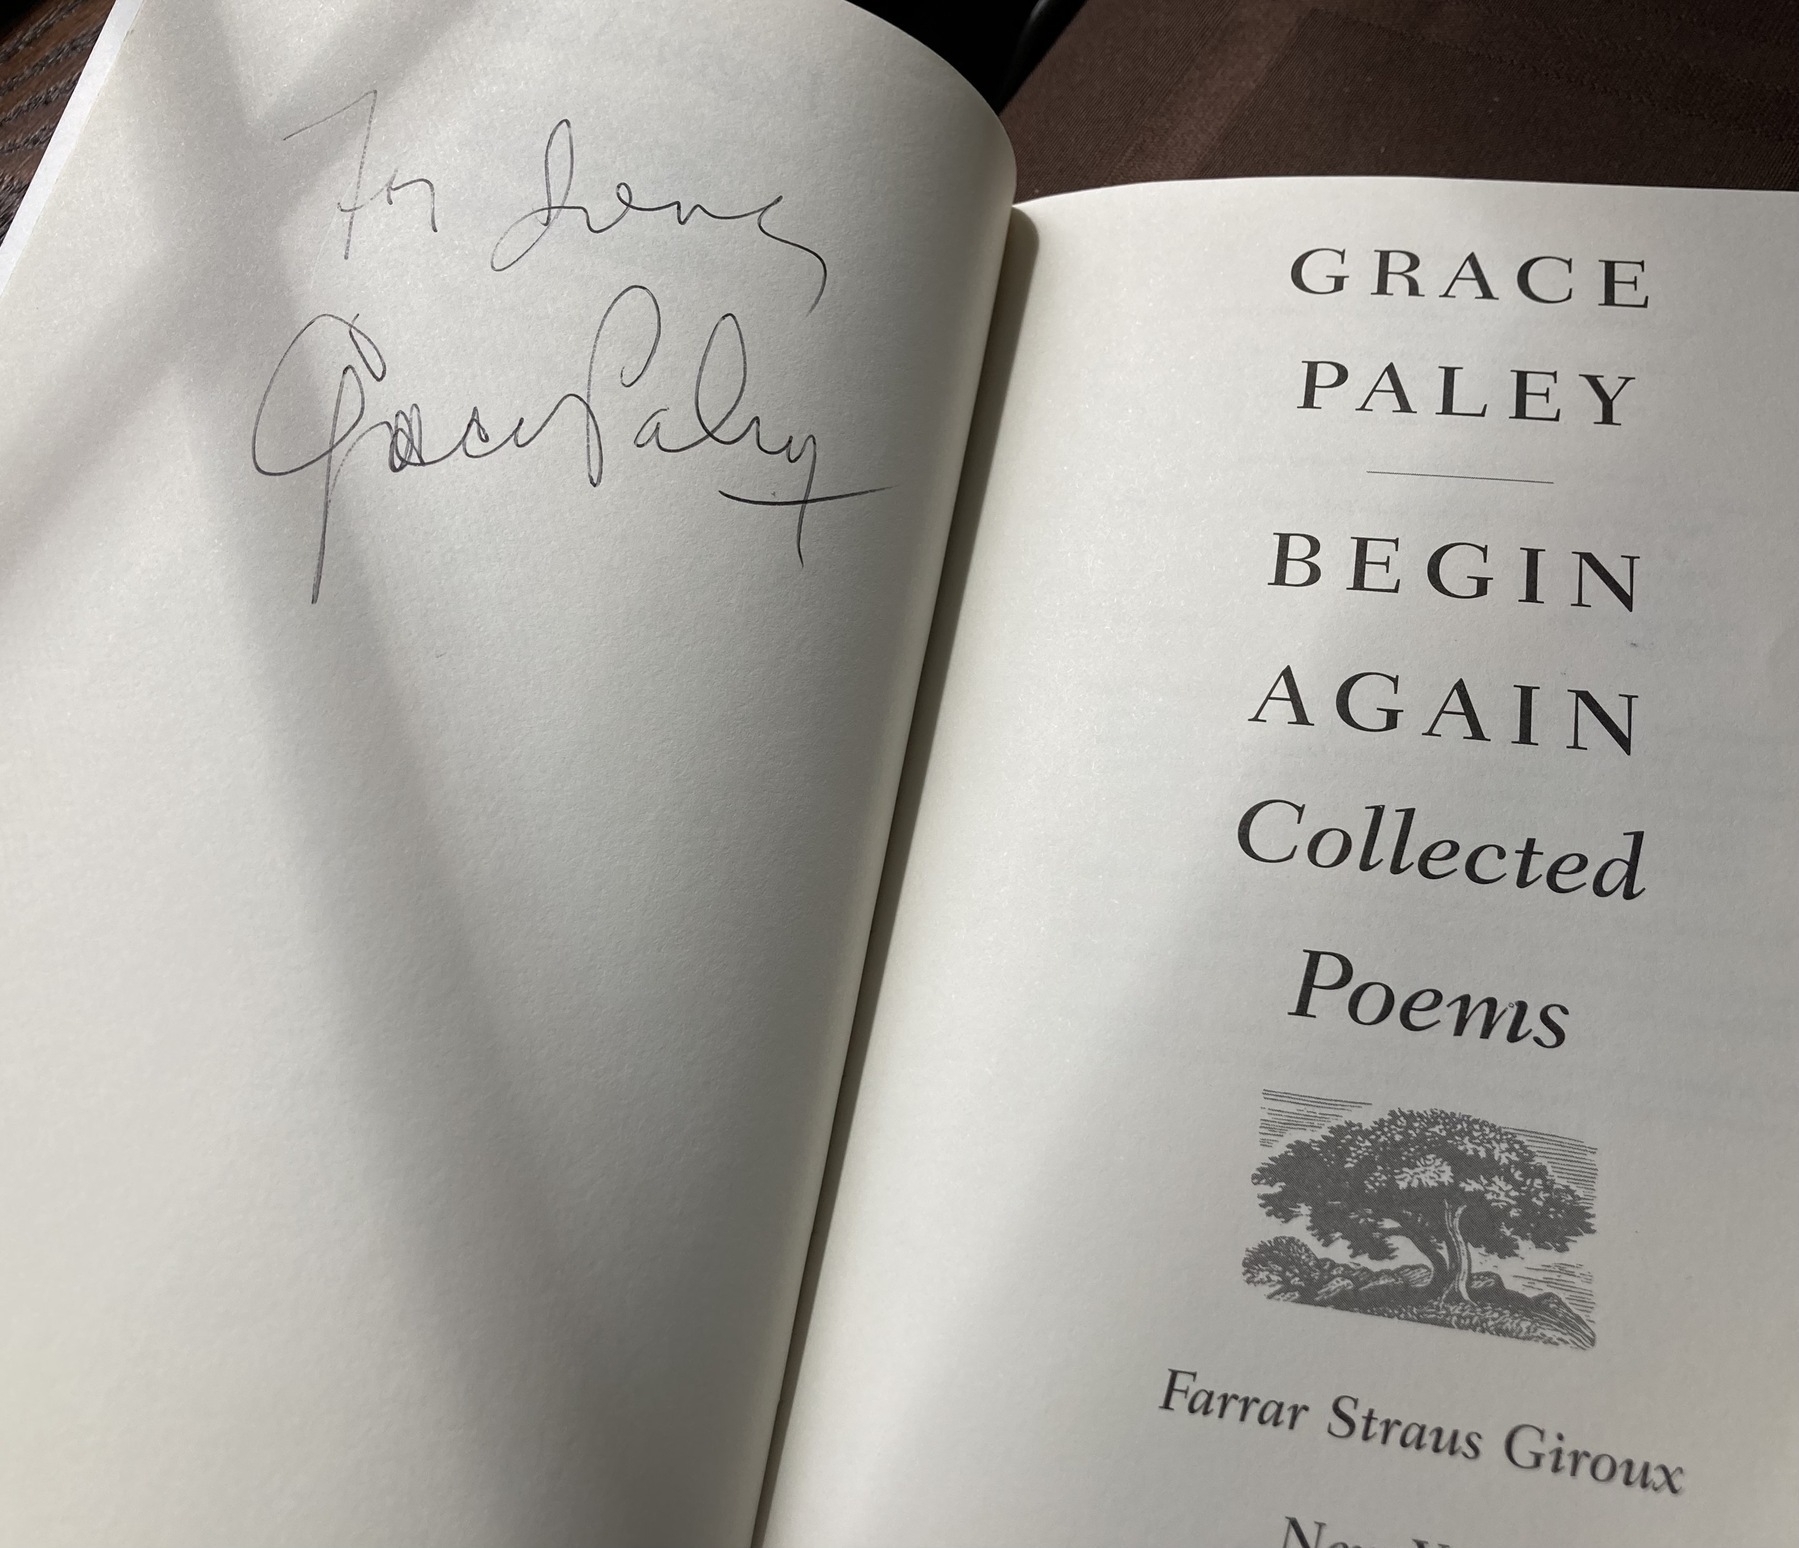 the title page of Grace Paley's Collected Poems with her signature